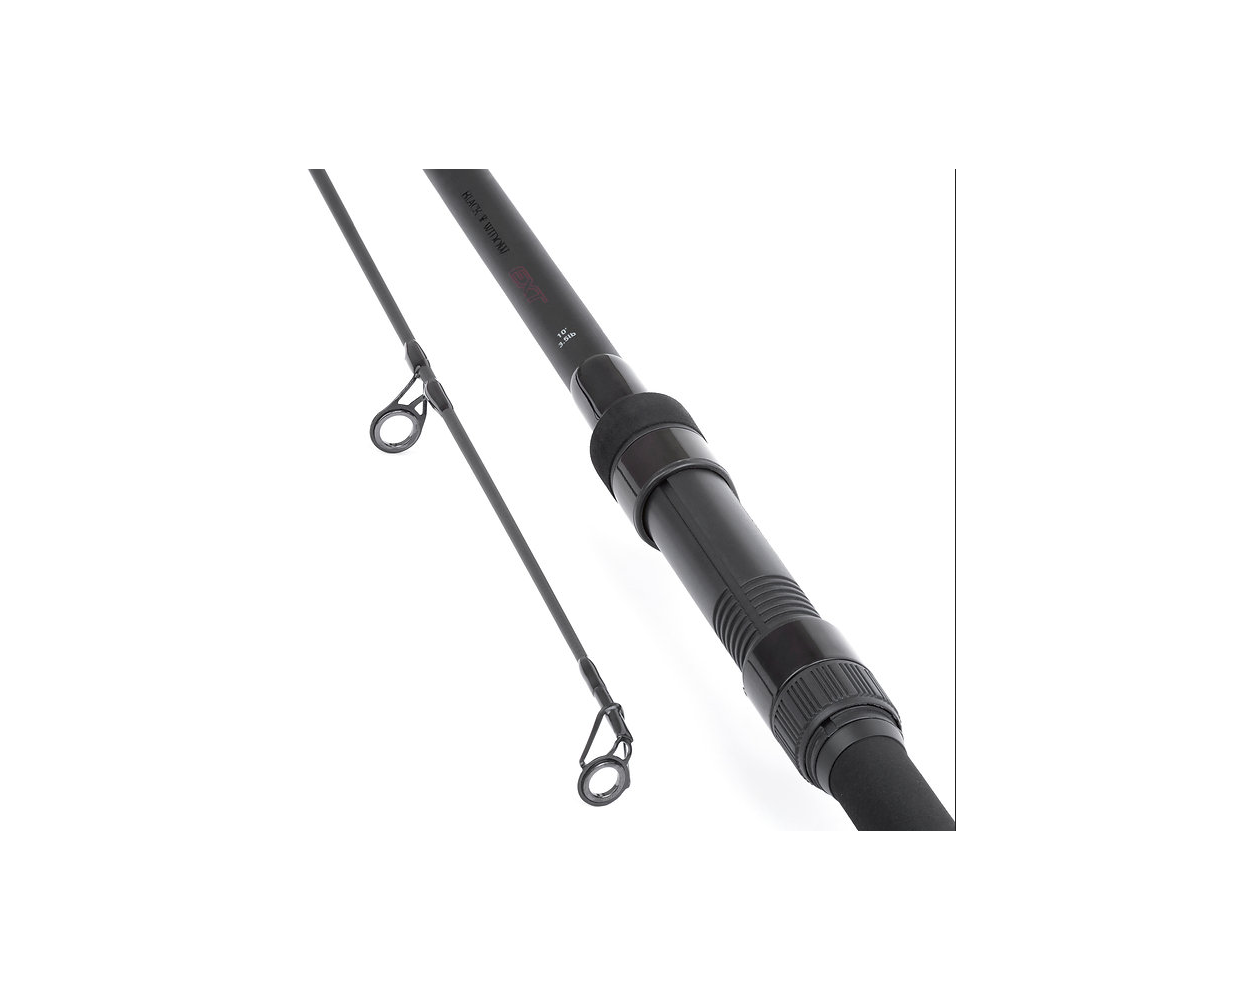 https://www.bristolangling.com/media/catalog/product/cache/3baf0cabed62547553189dd5548092a5/s/c/screen_shot_2022-04-06_at_11.57.38.png